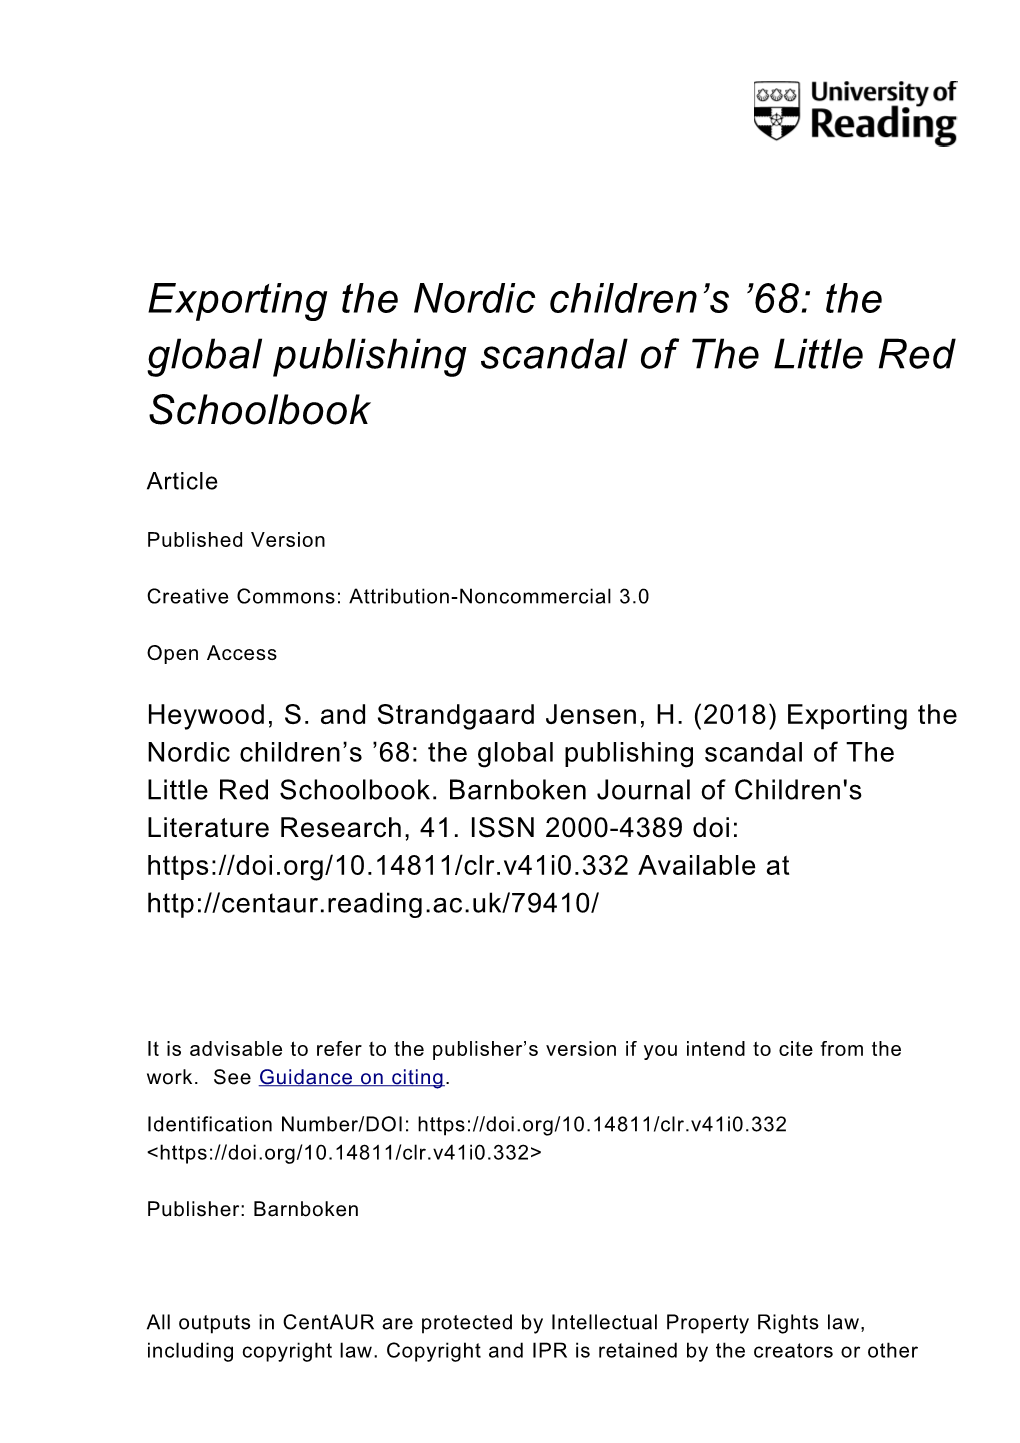 68: the Global Publishing Scandal of the Little Red Schoolbook